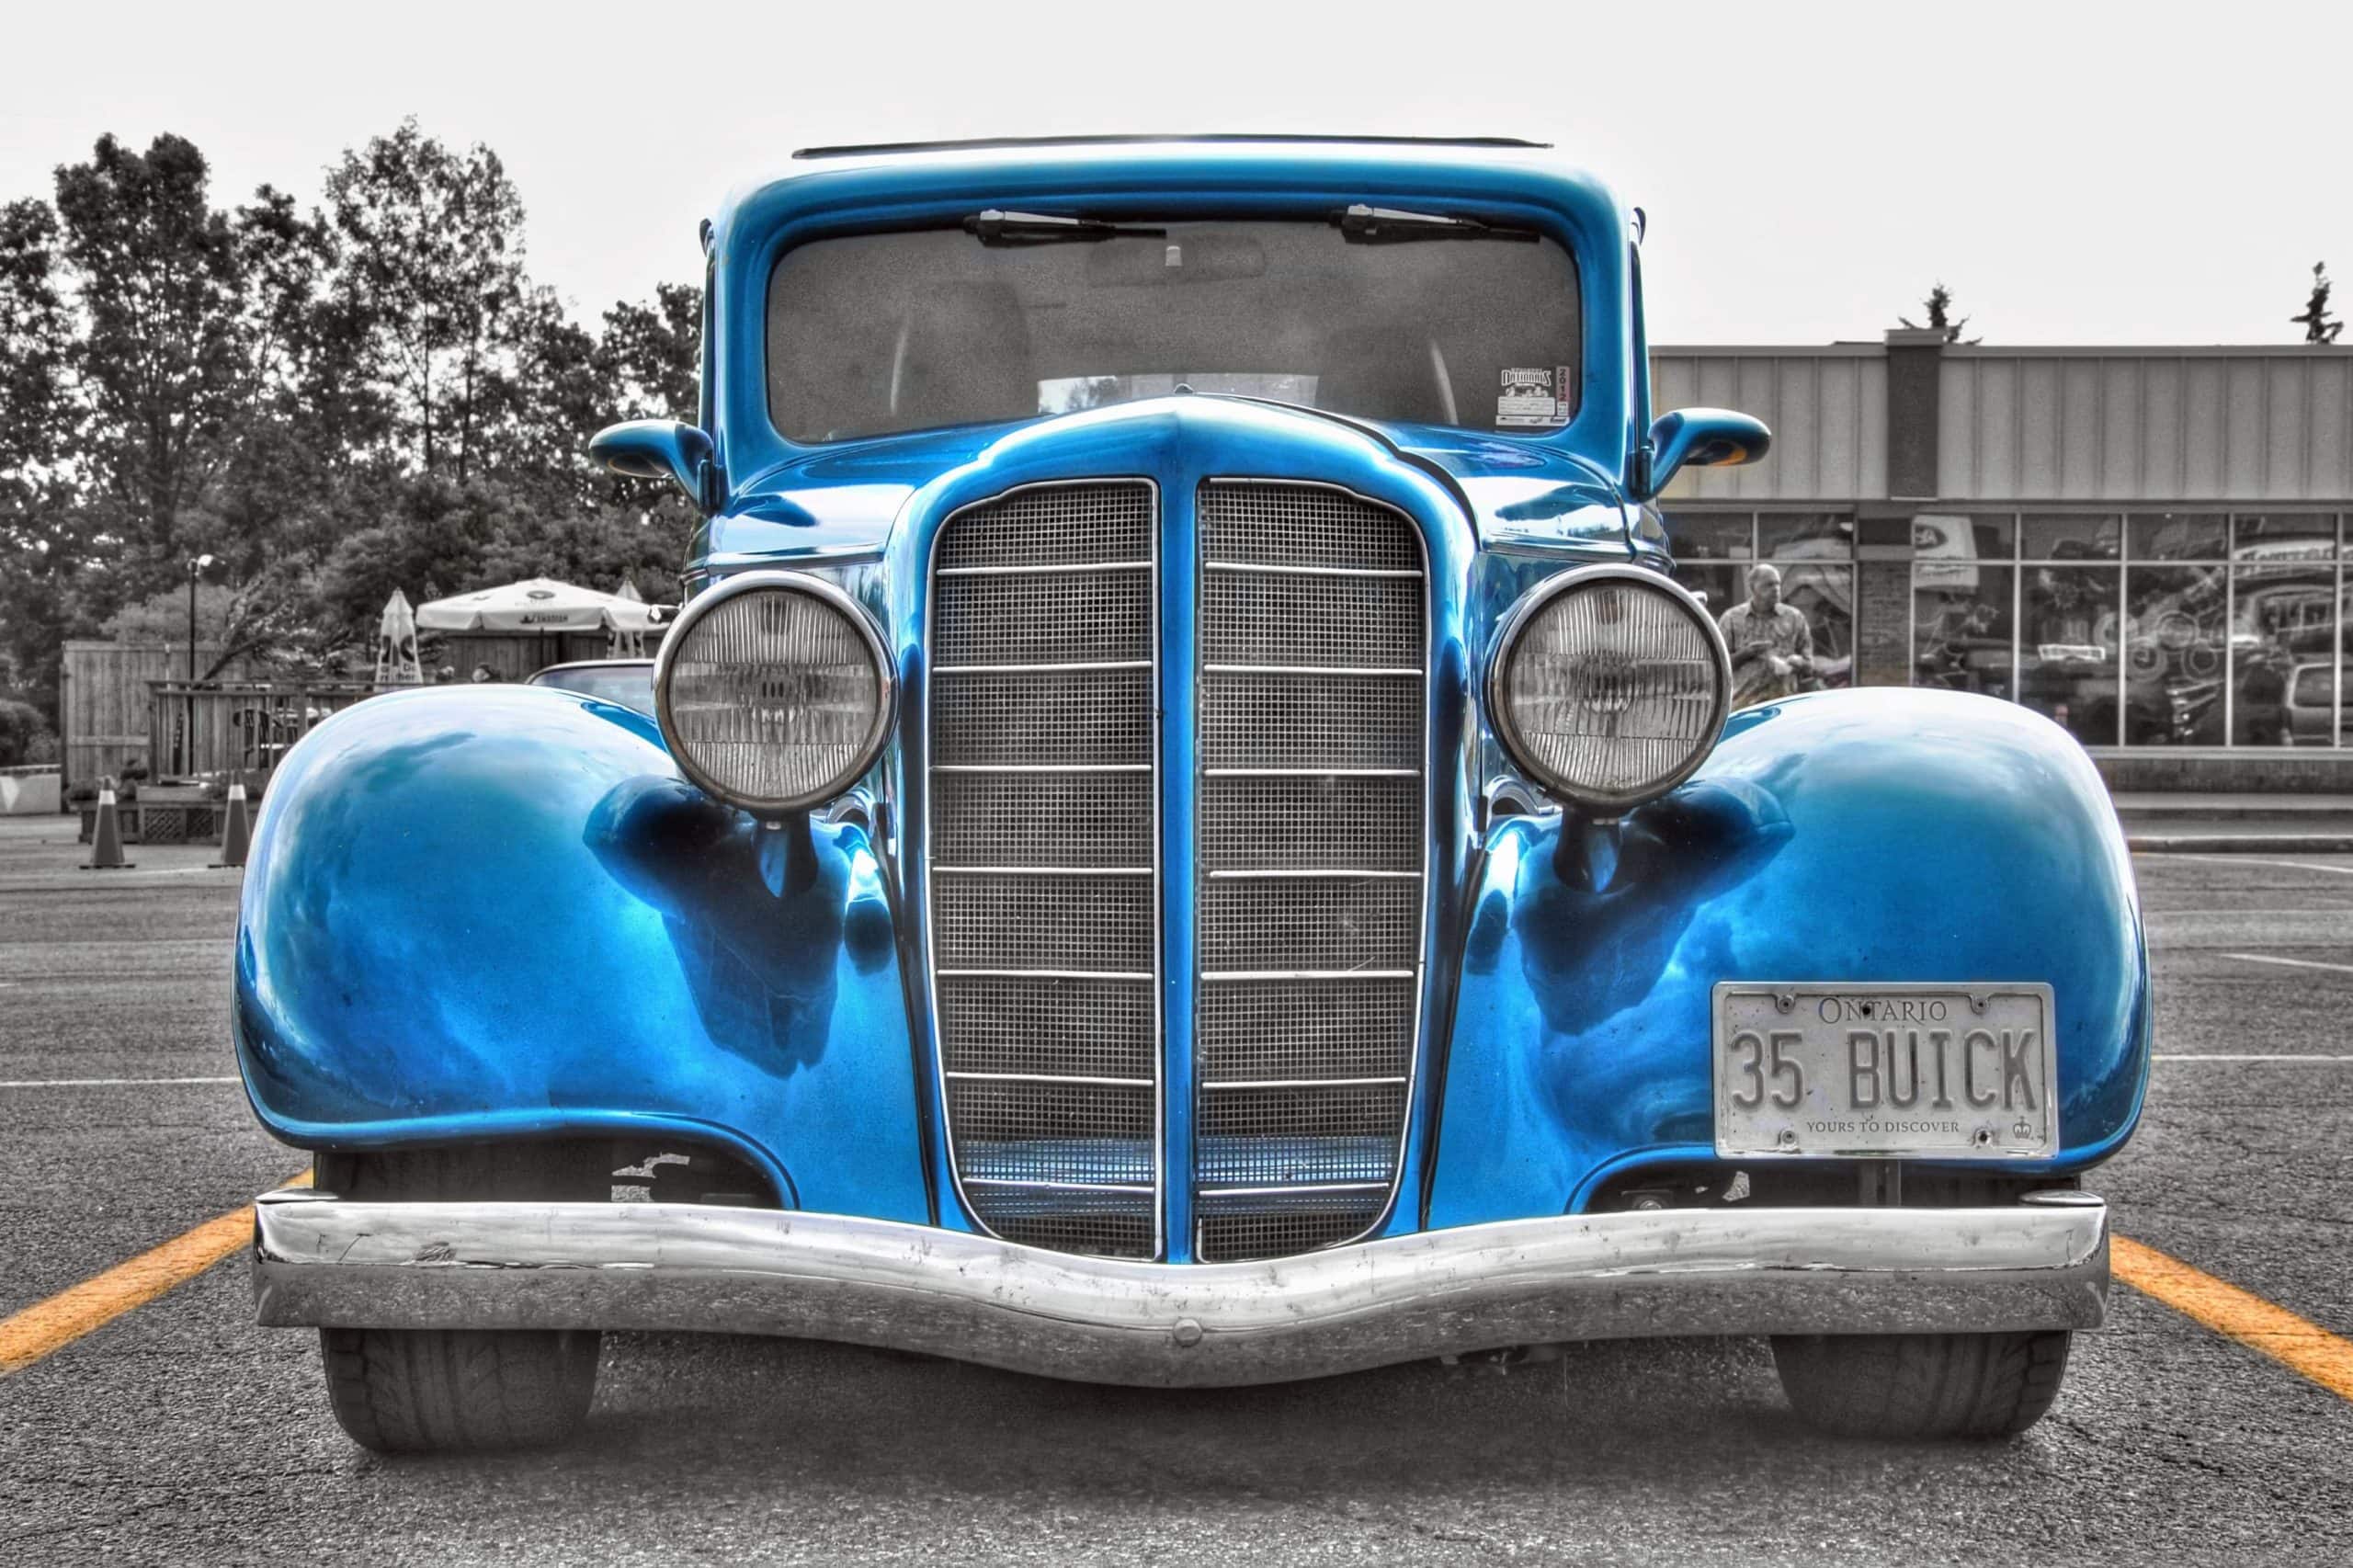 KellyG - Day 183- '35 buick